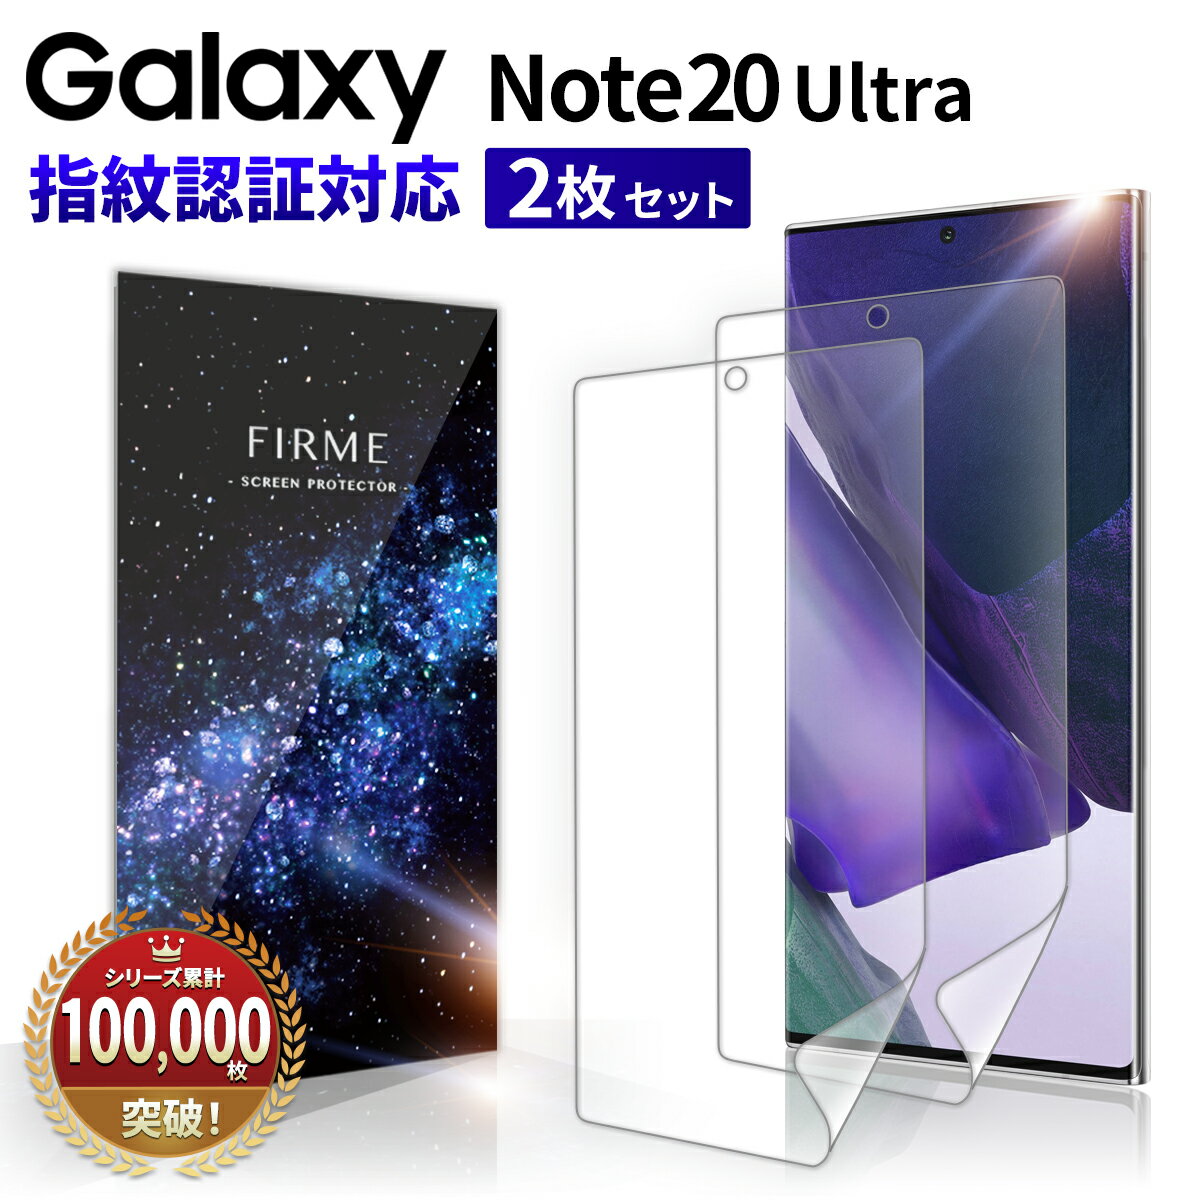 【10%OFF券配布】【指紋認証対応】 Galaxy Note20 Ultra 5G Note10 Plus Note8 Note9 フィルム 全面保護 本体 <strong>手帳</strong>型 ケース 干渉しない 保護フィルム 指紋認証 ギャラクシー フィルム 割れない 玄人モデル TPU 画面保護 曲面 対